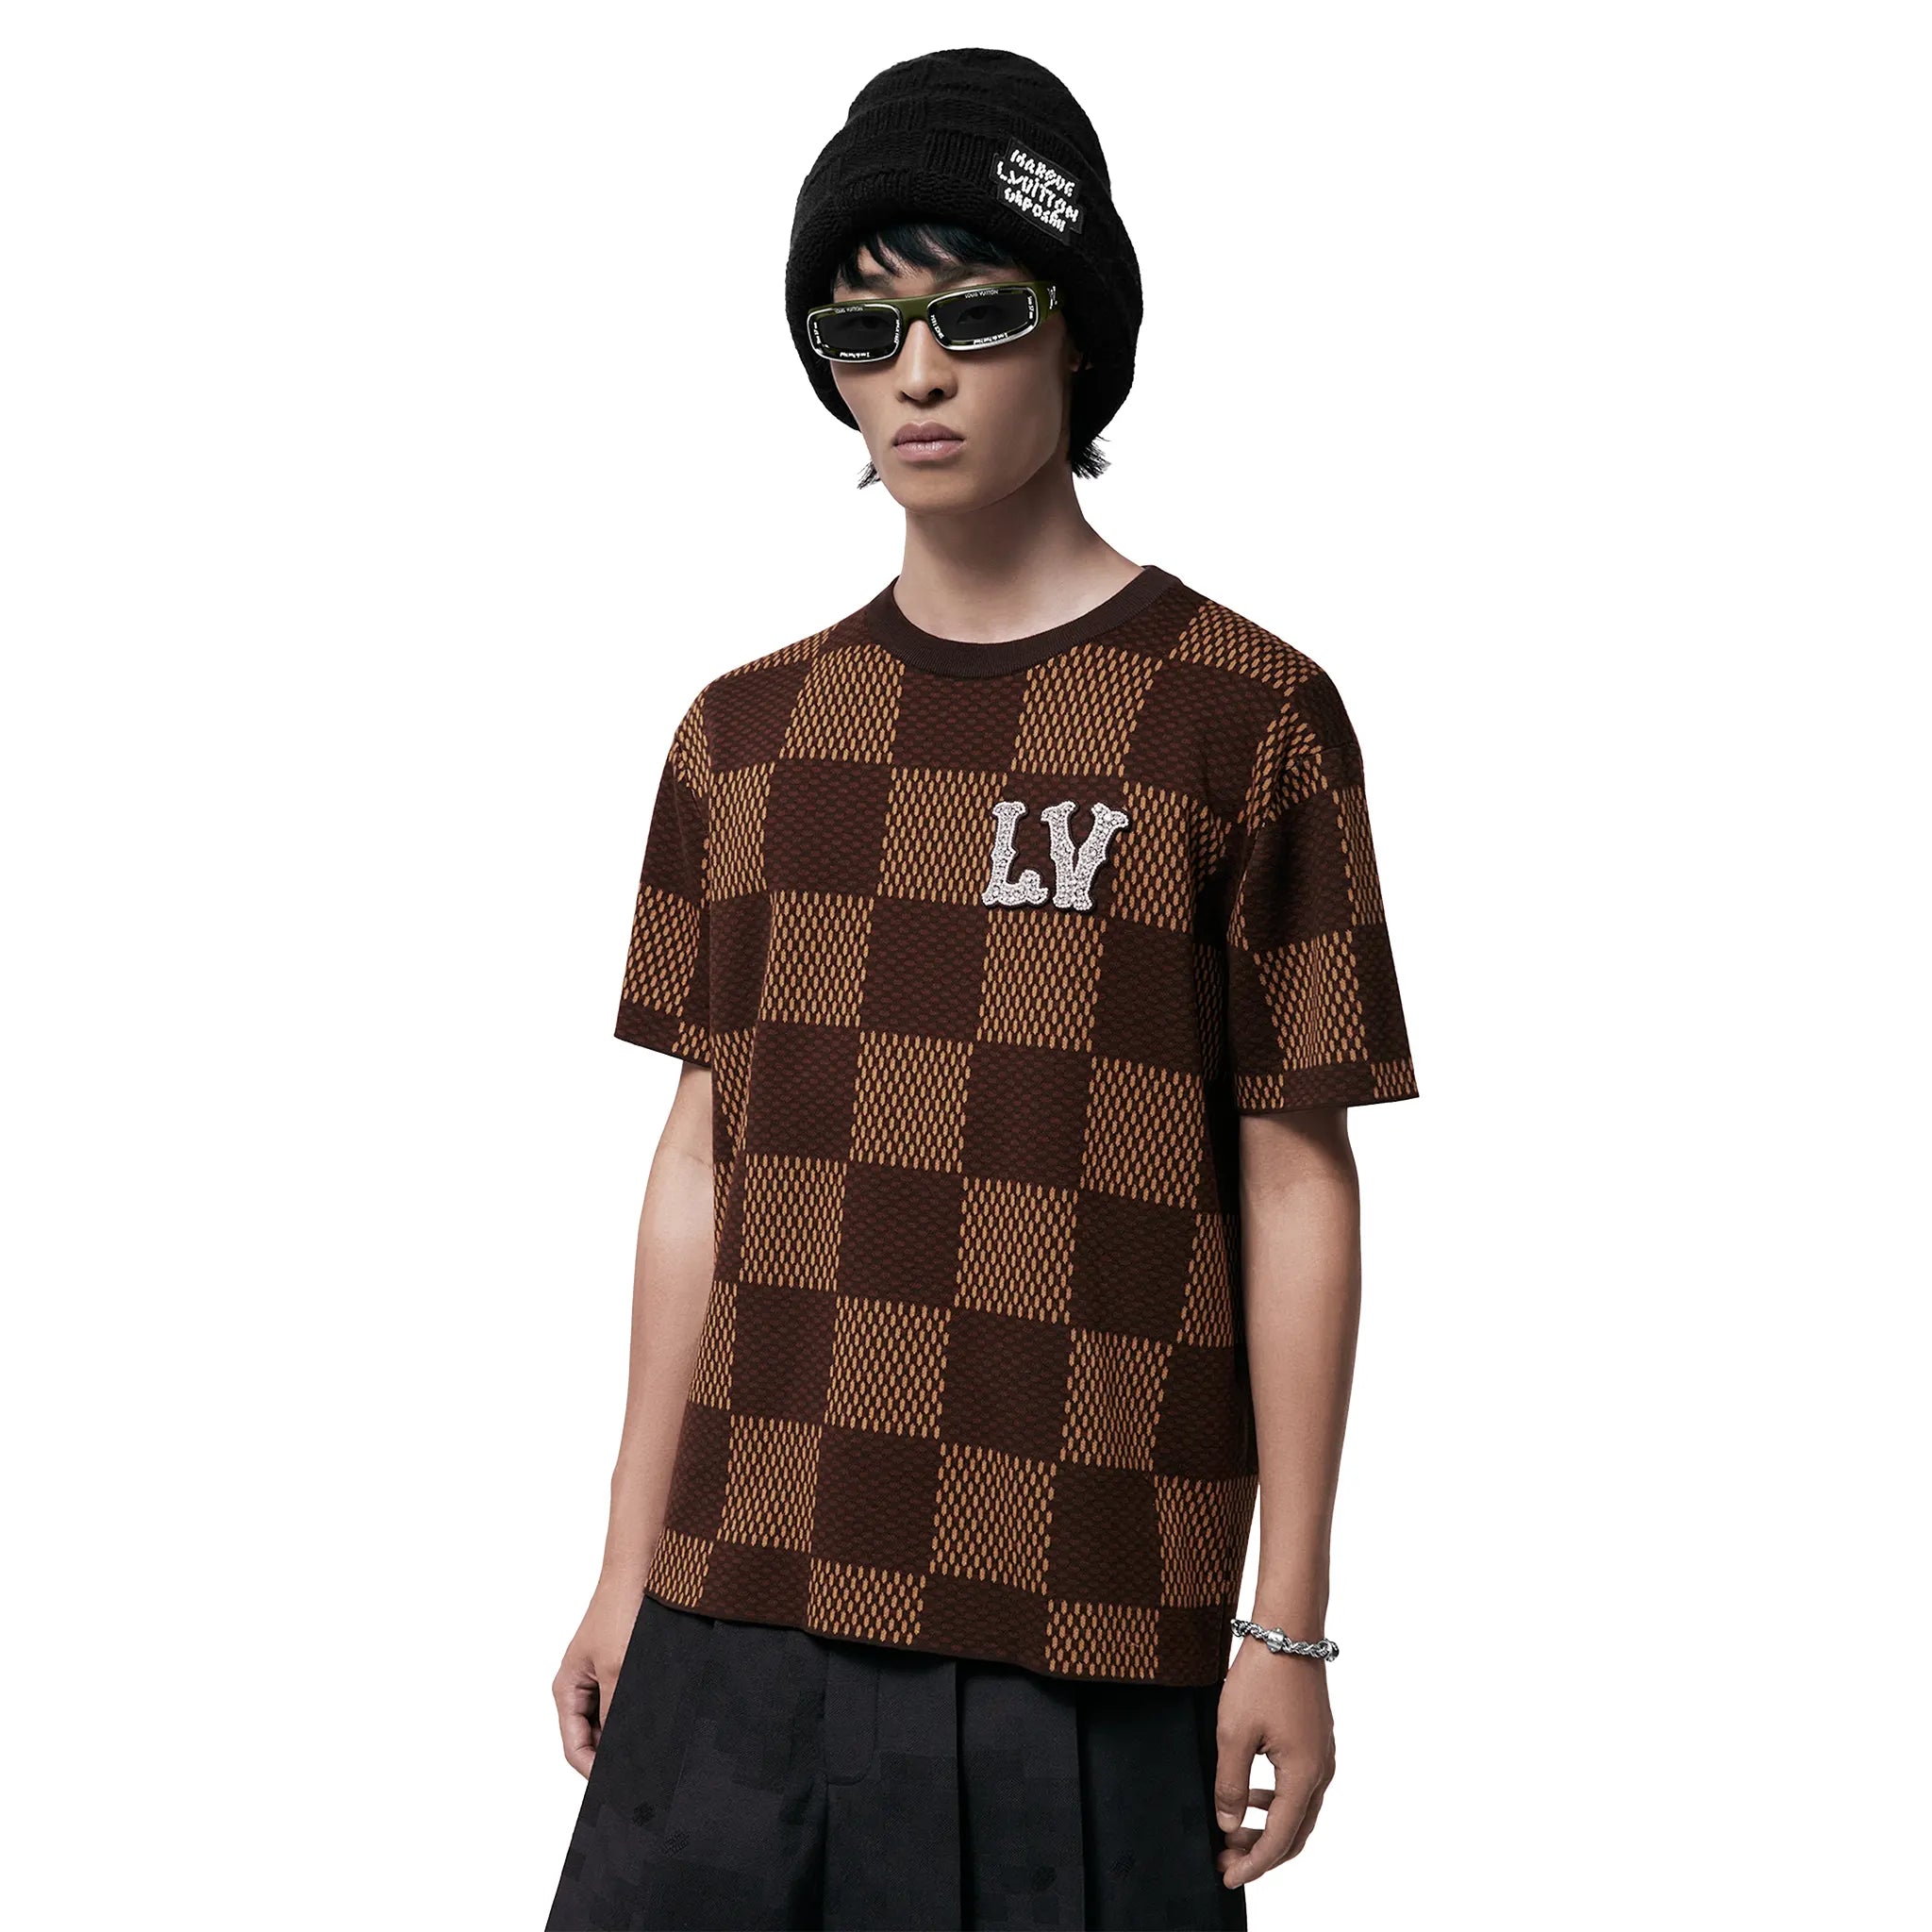 Model front view of Louis Vuitton Damier LV Crystal Patch Brown T Shirt NVPROD4940223V